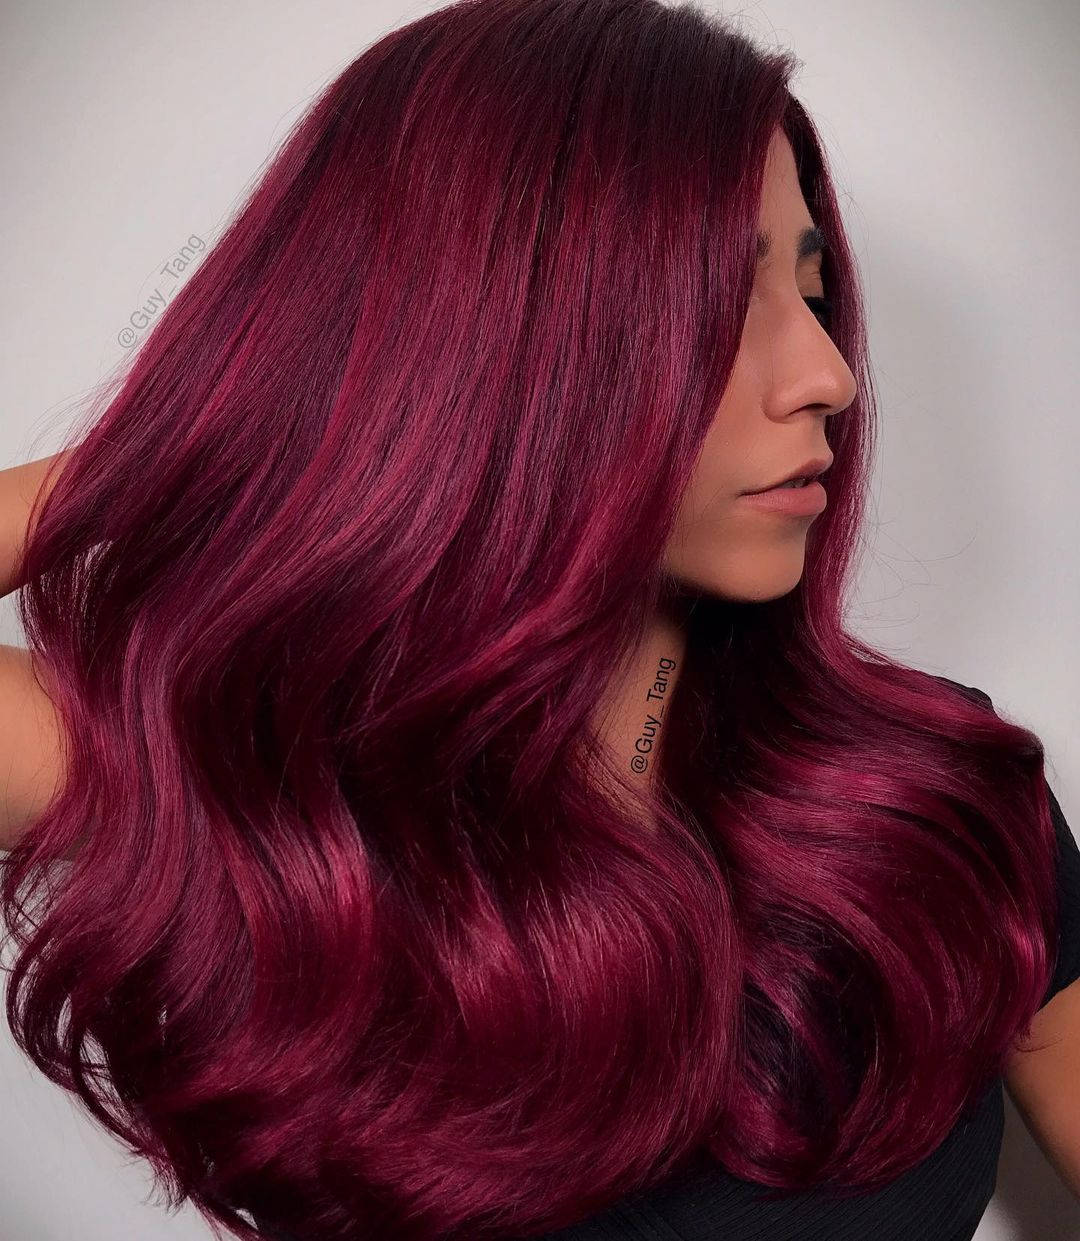 Woman With Magenta Hair Side View Wallpaper